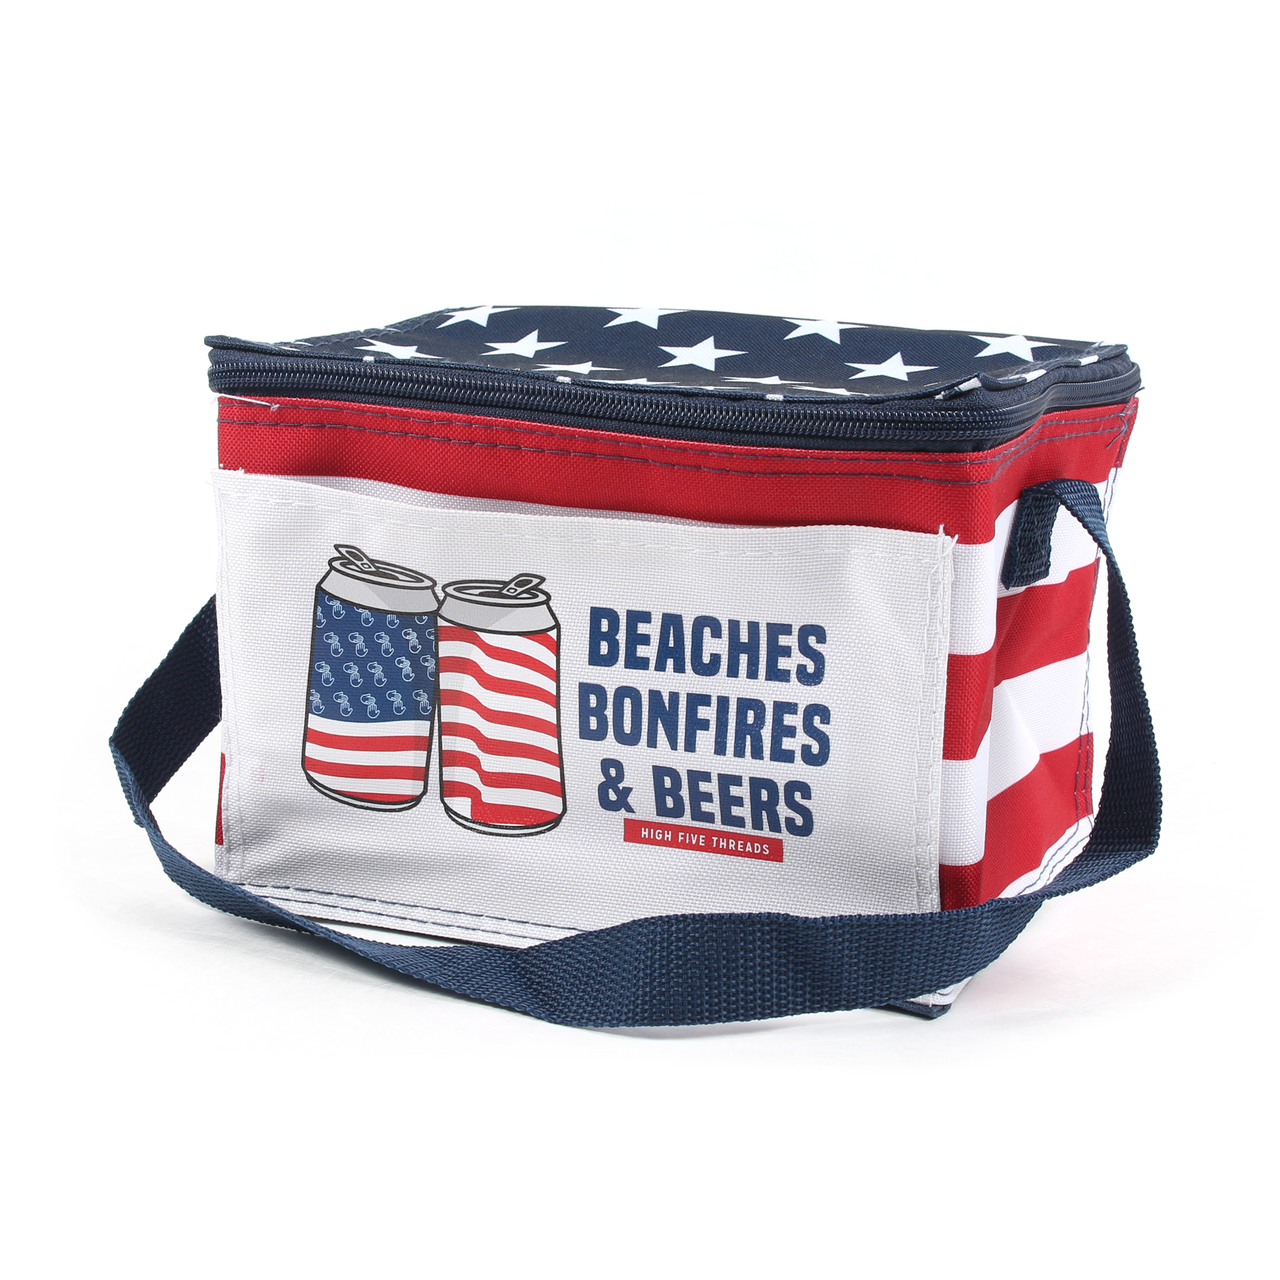 Beaches, Bonfires and Beers Cooler